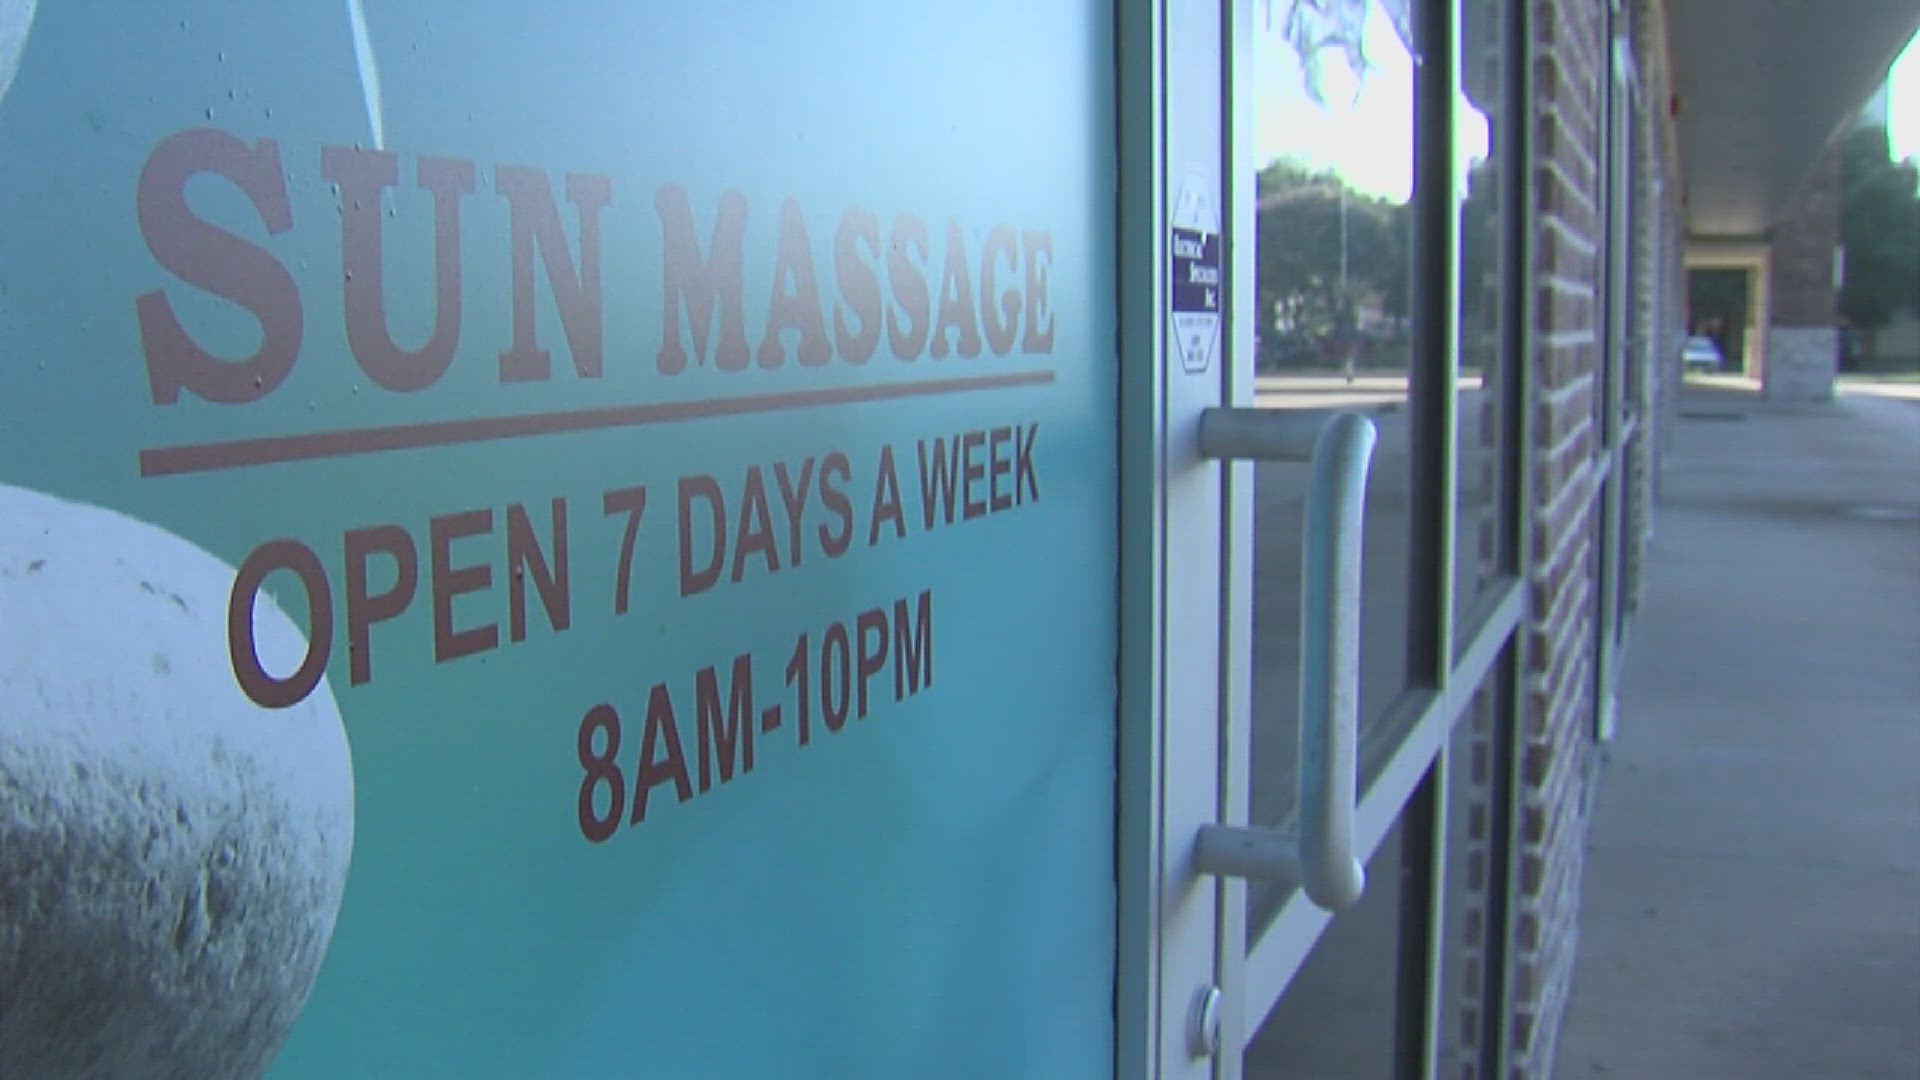 Police began investigating the massage parlor after receiving multiple prostitution complaints about the business.